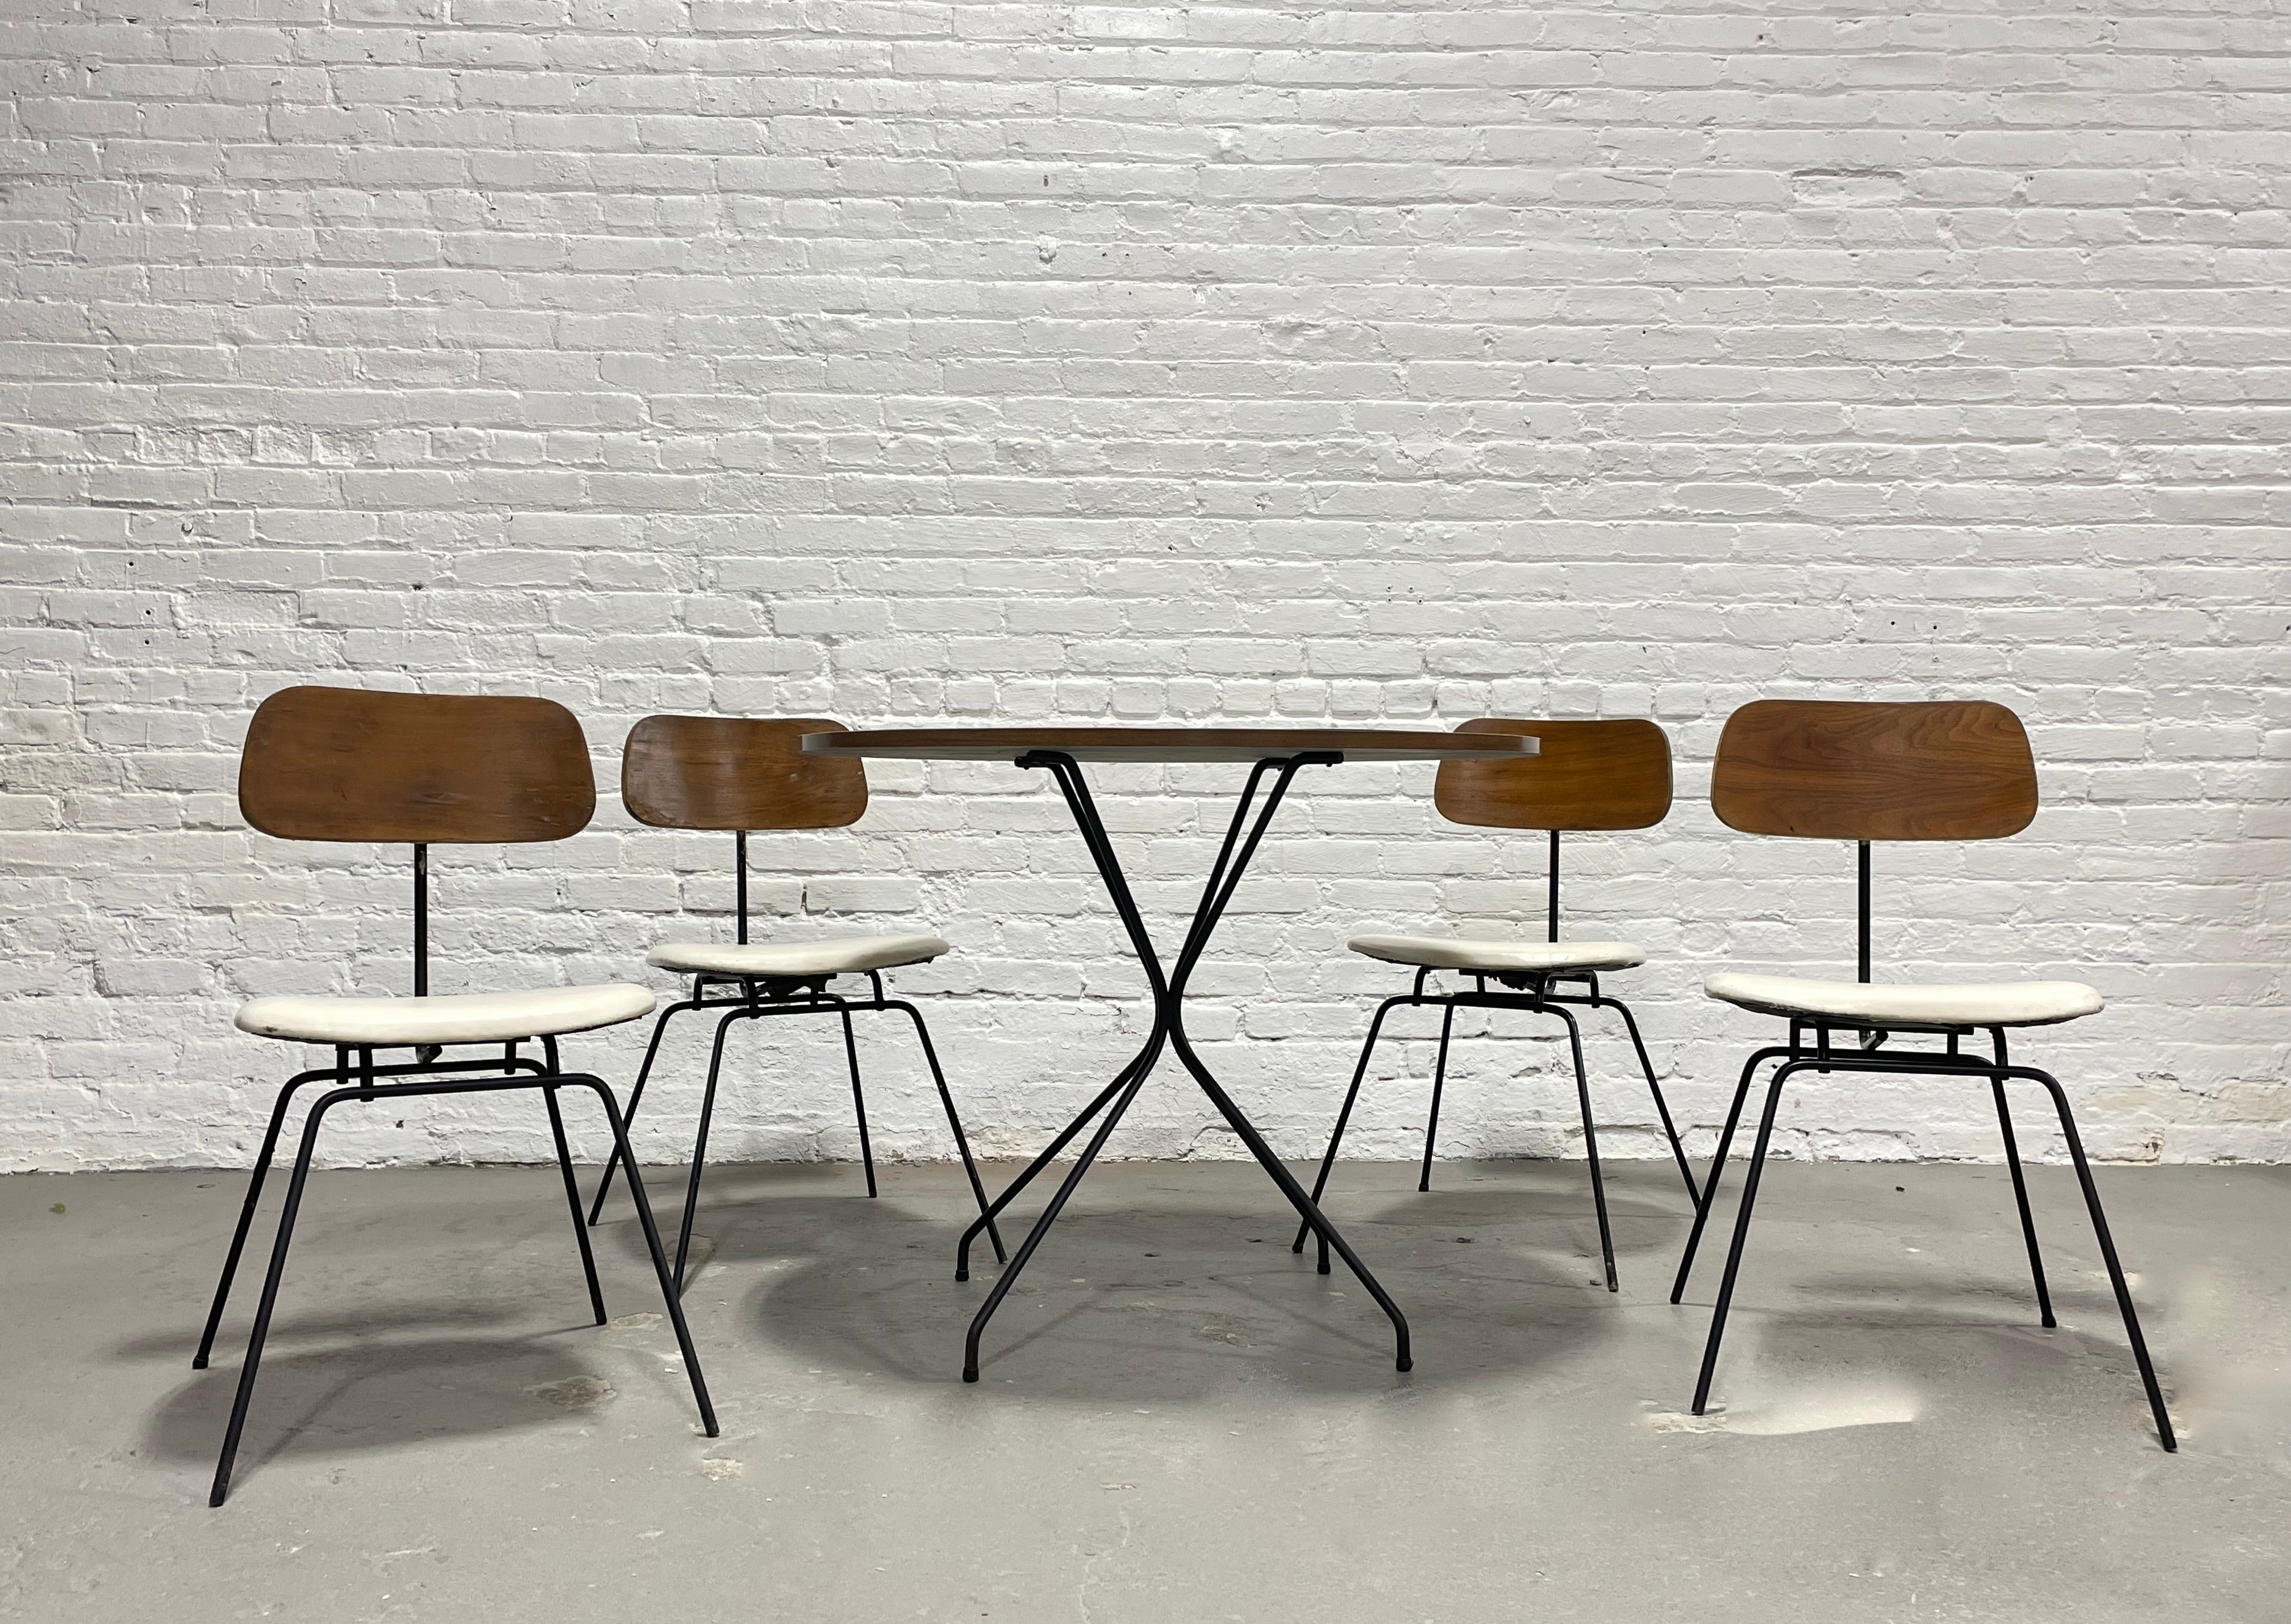 Mid Century Modern DINING SET styled after Clifford PASCOE, c. 1960's